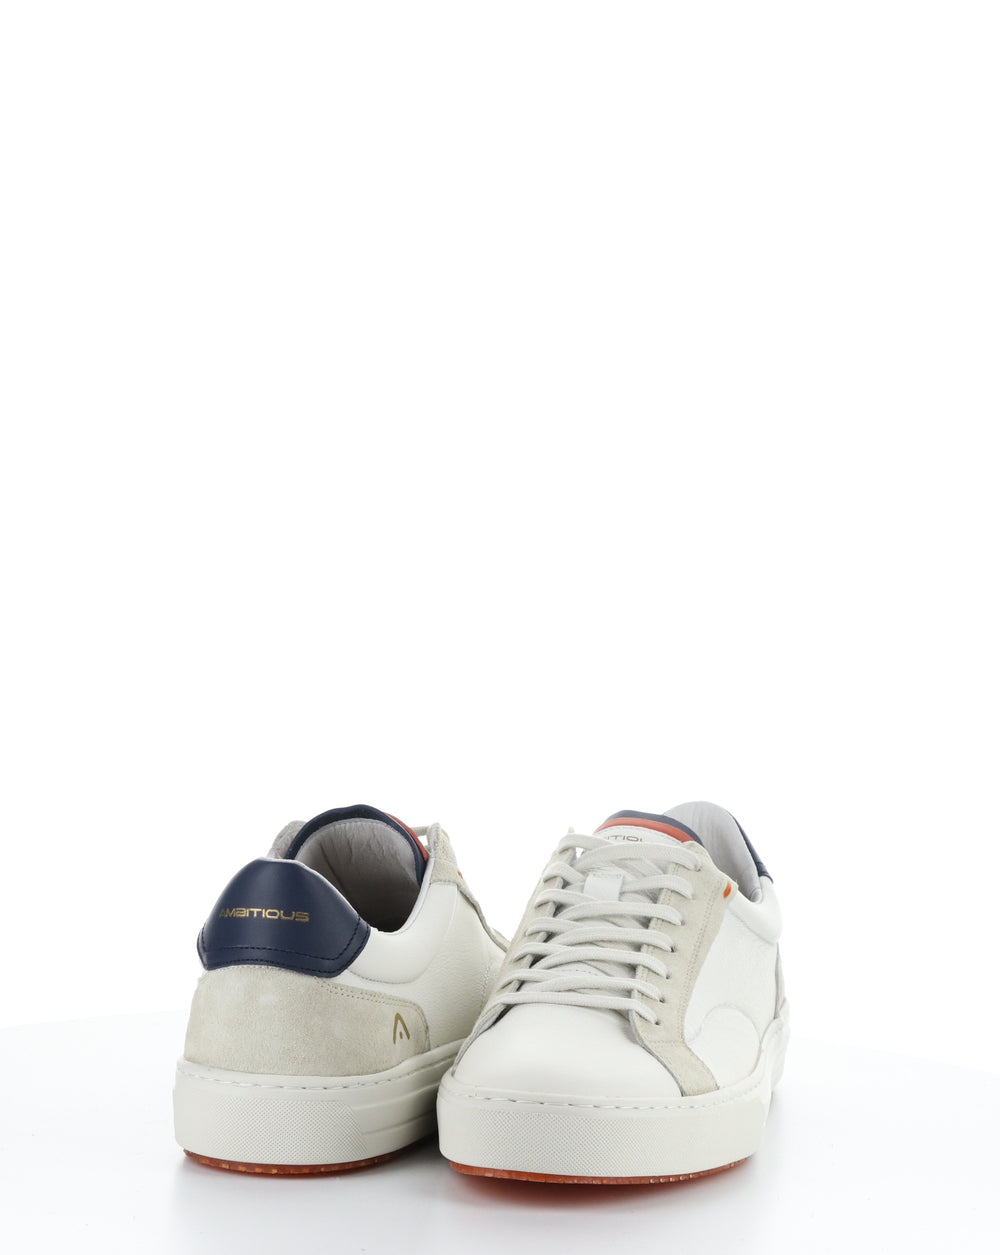 11218 WHITE/NAVY Lace-up Shoes